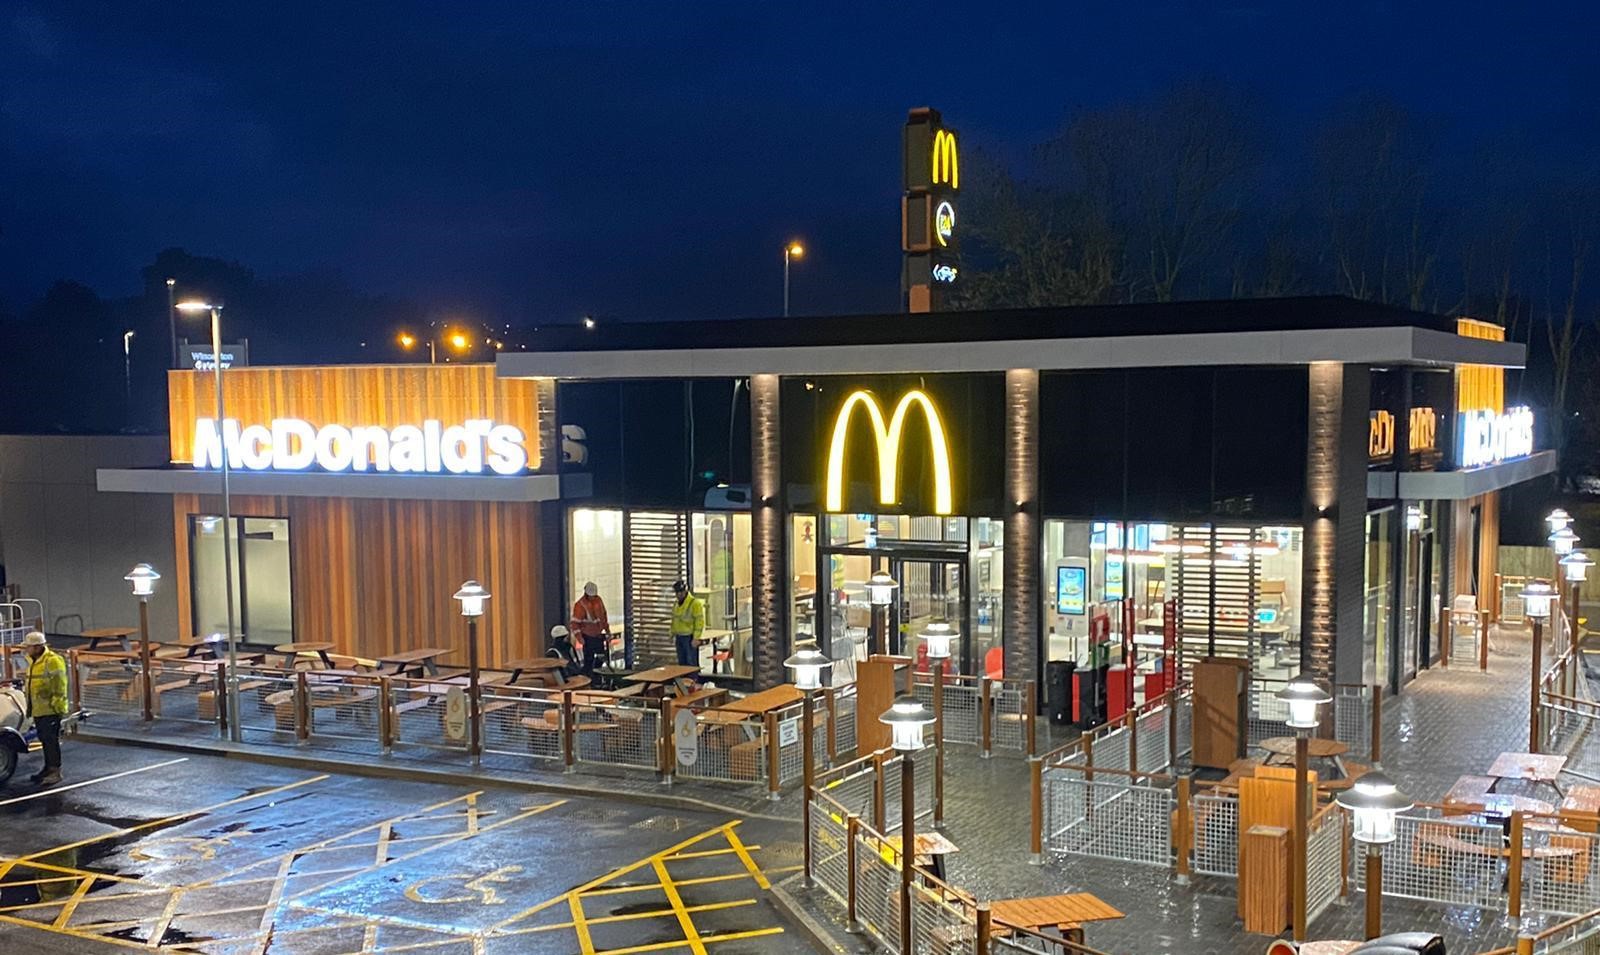 McDonald's Wincanton just before it opened for the first time